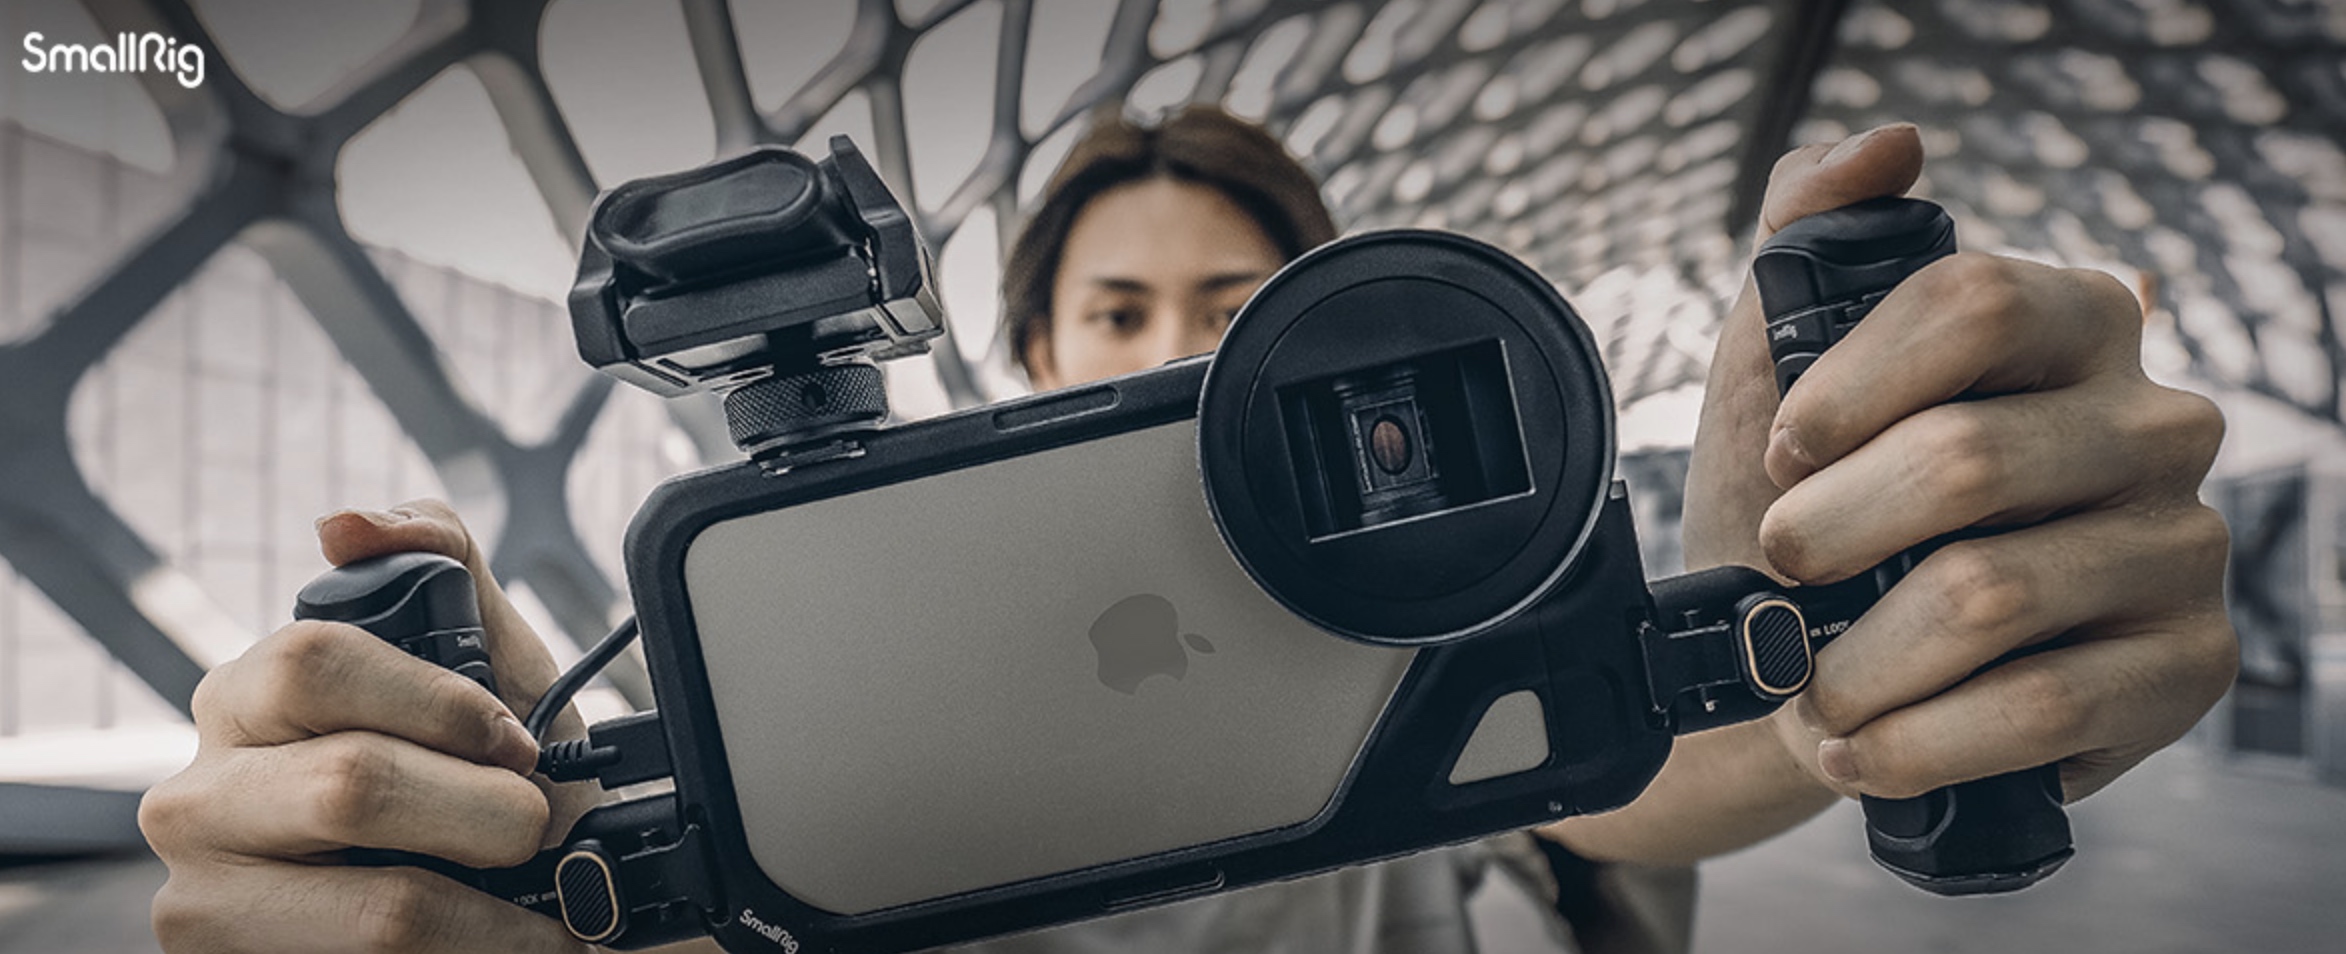 Is SmallRig's Mobile Video Kit the Best iPhone Cage System?